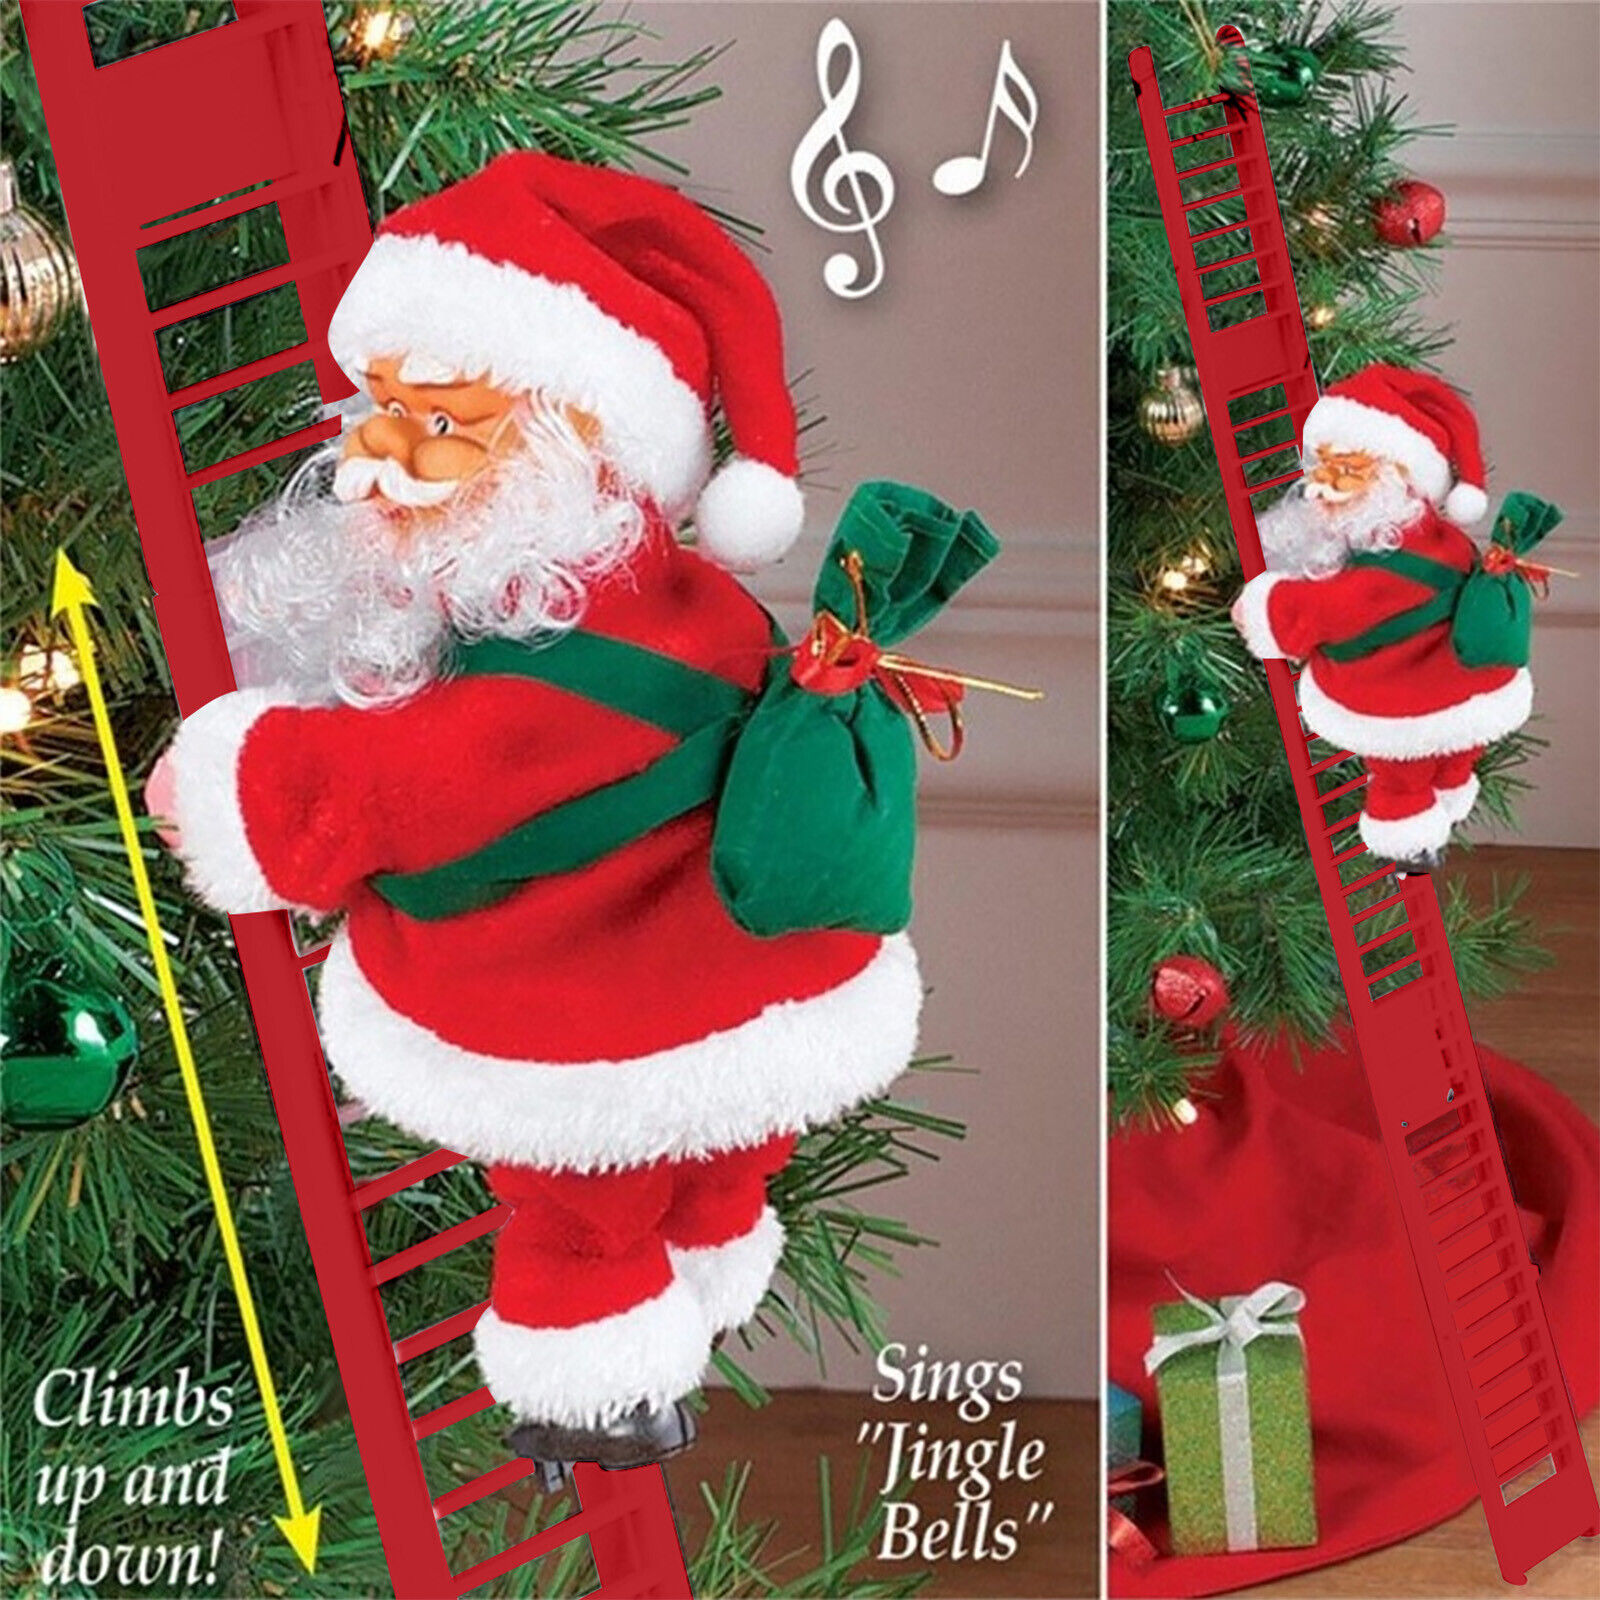 Electric Climbing Ladder Santa Claus Doll Party Music Figurine Games Kids 2-4